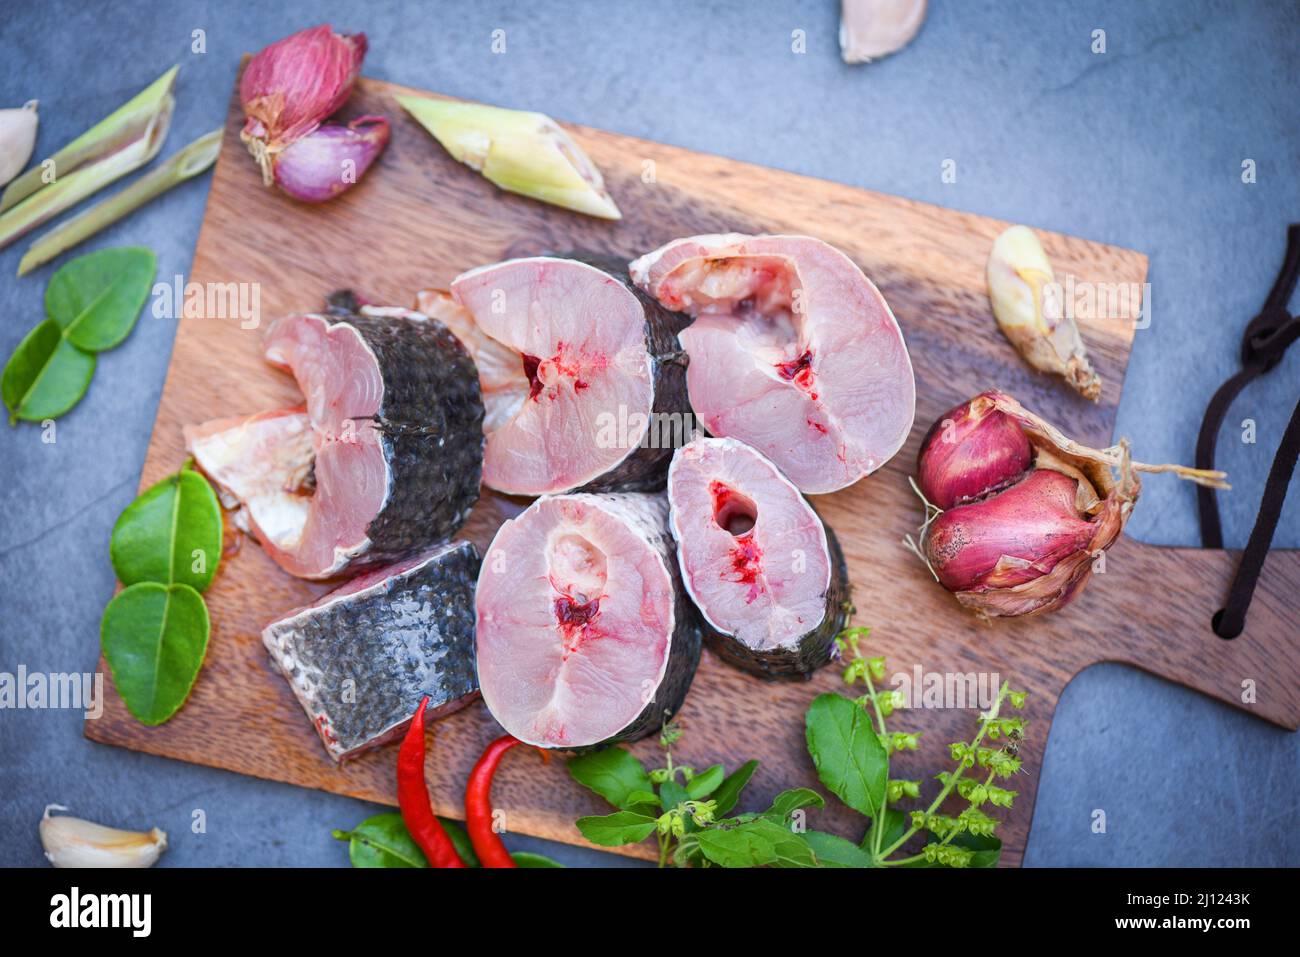 striped snakehead fish chopped with ingredients herb and spices on wooden cutting board and table kitchen background, Fresh raw Snake head fish menu f Stock Photo